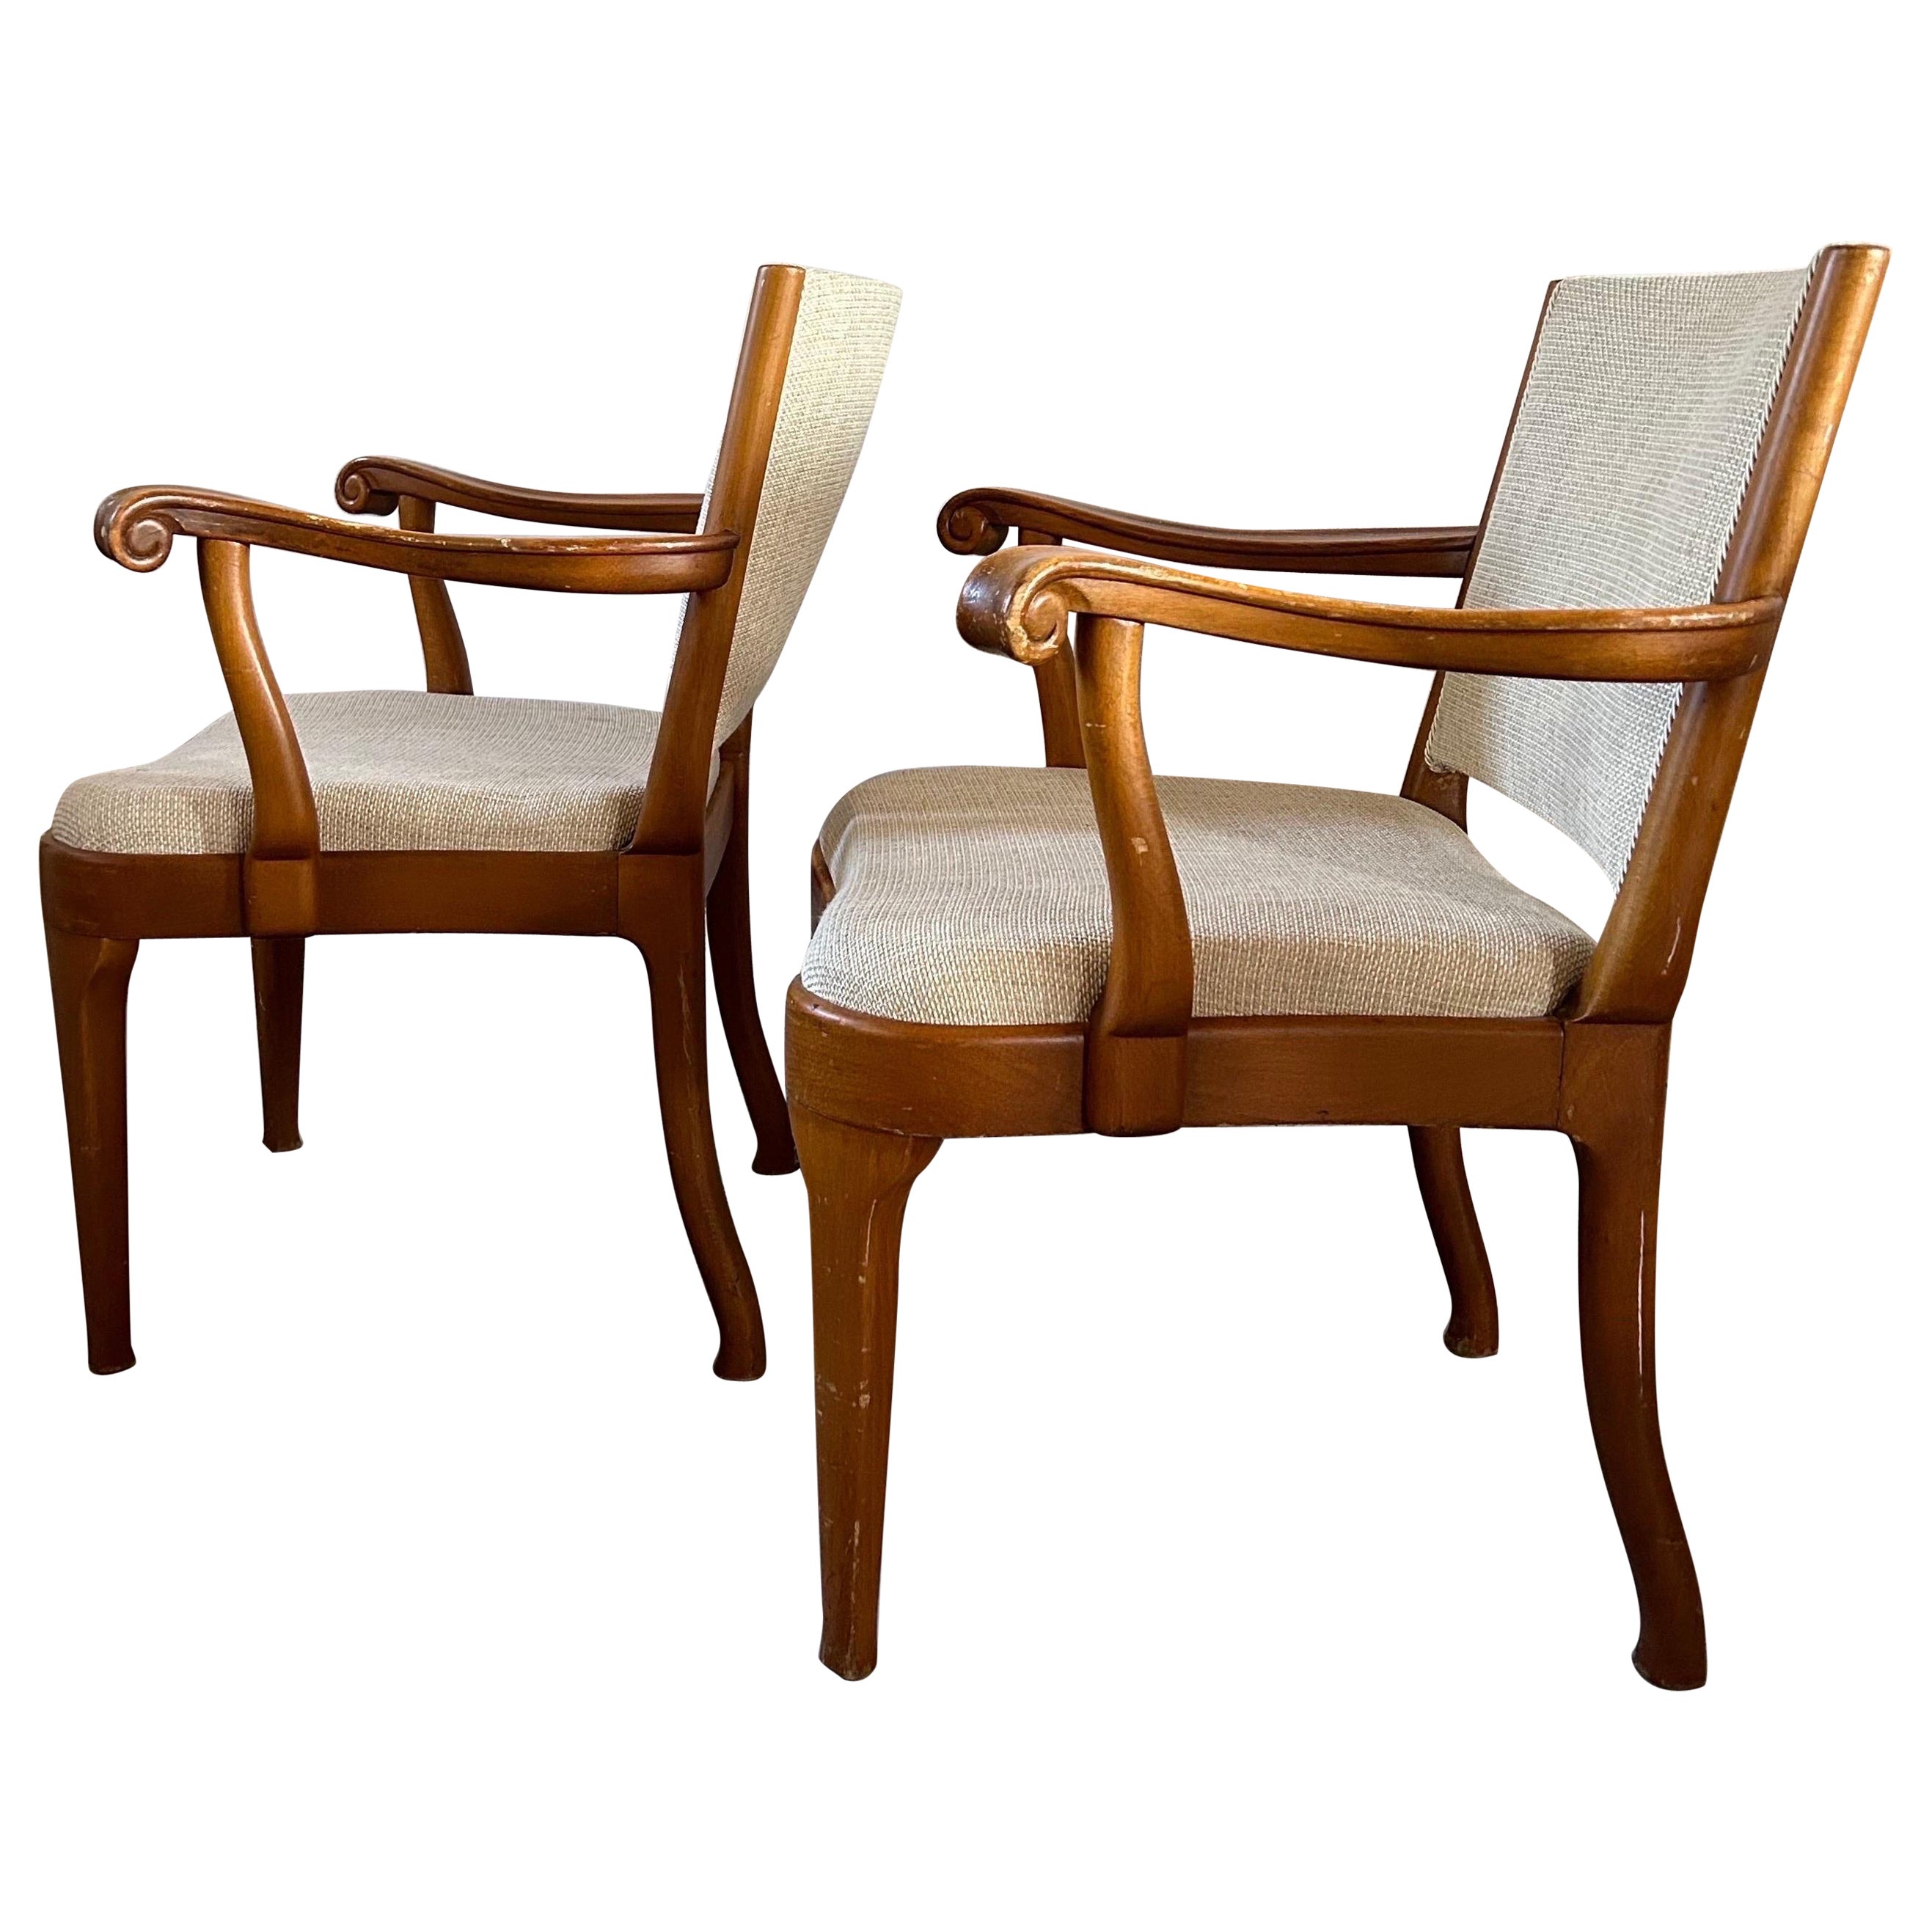 Pair of Arts and Crafts Armchairs by Thorvald Jørgensen for Fritz Hansen 1910’s For Sale